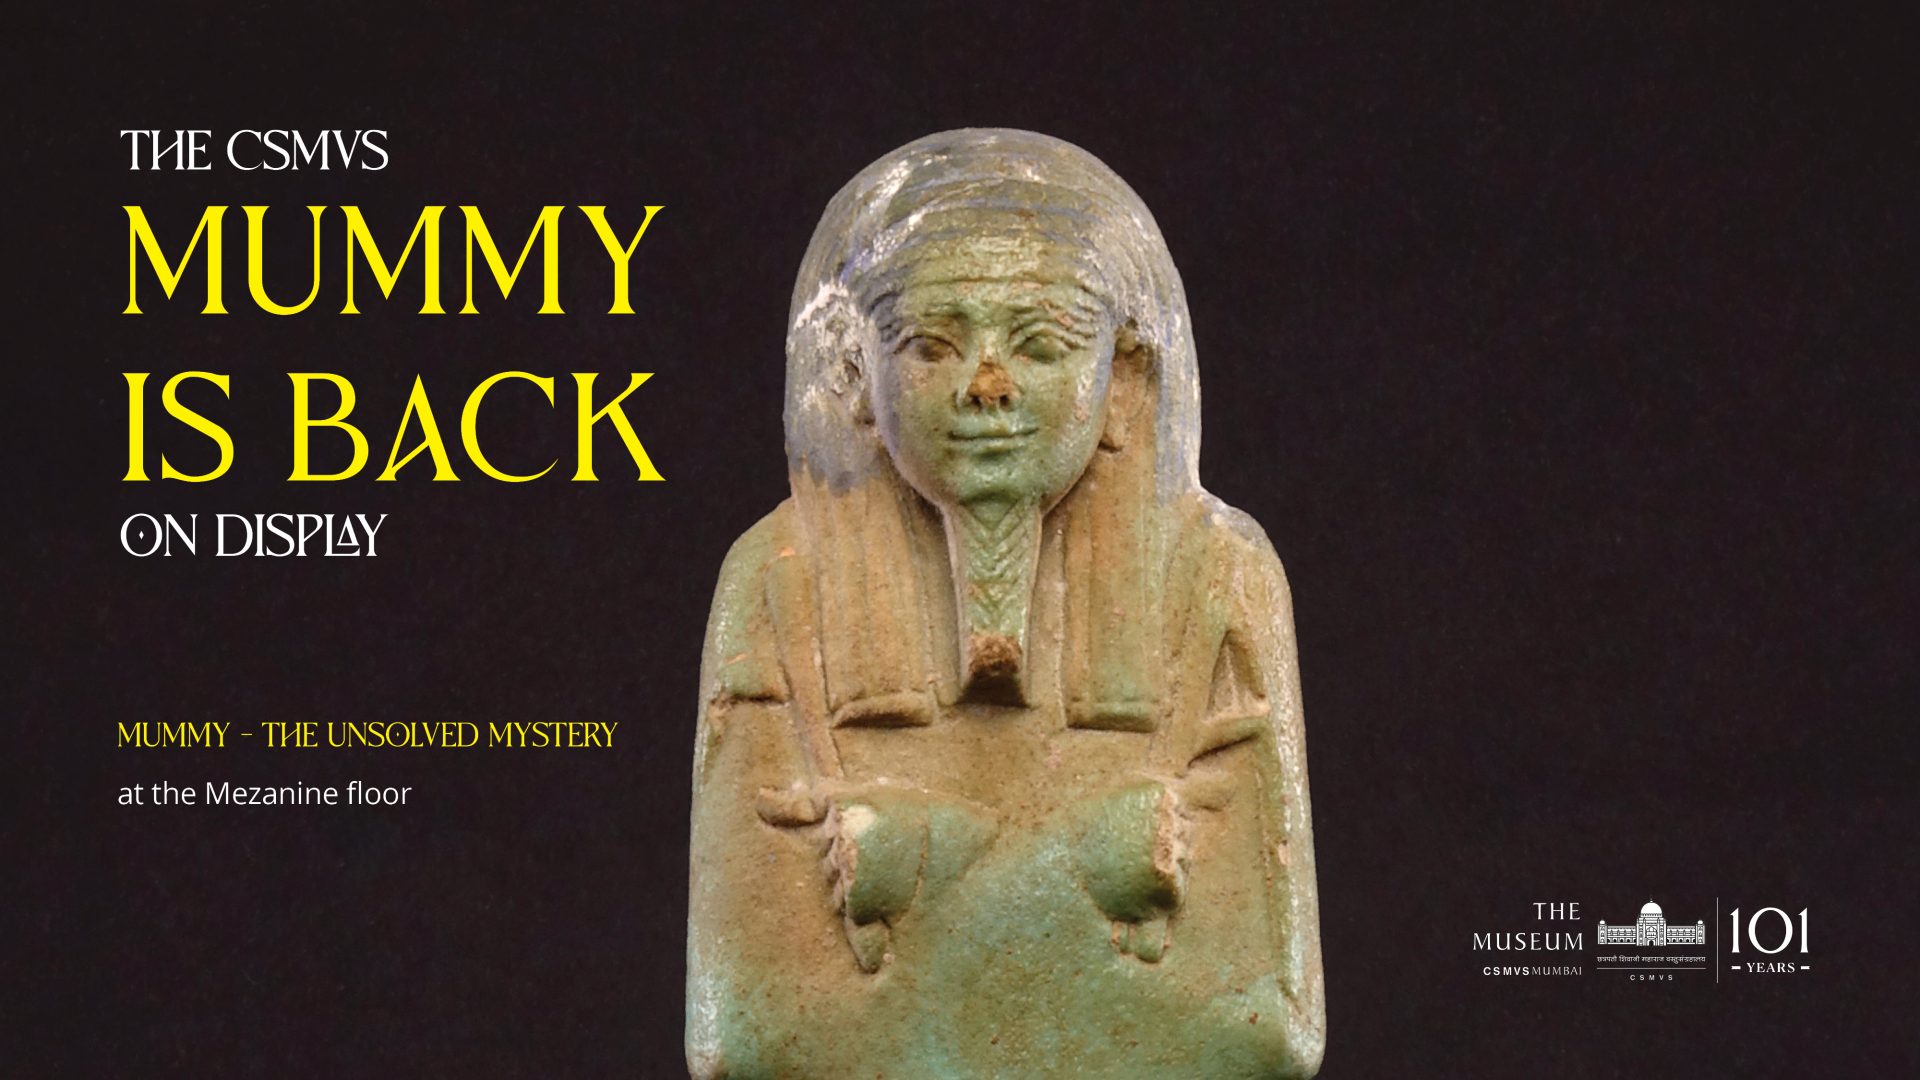 Mummy: The Unsolved Mystery